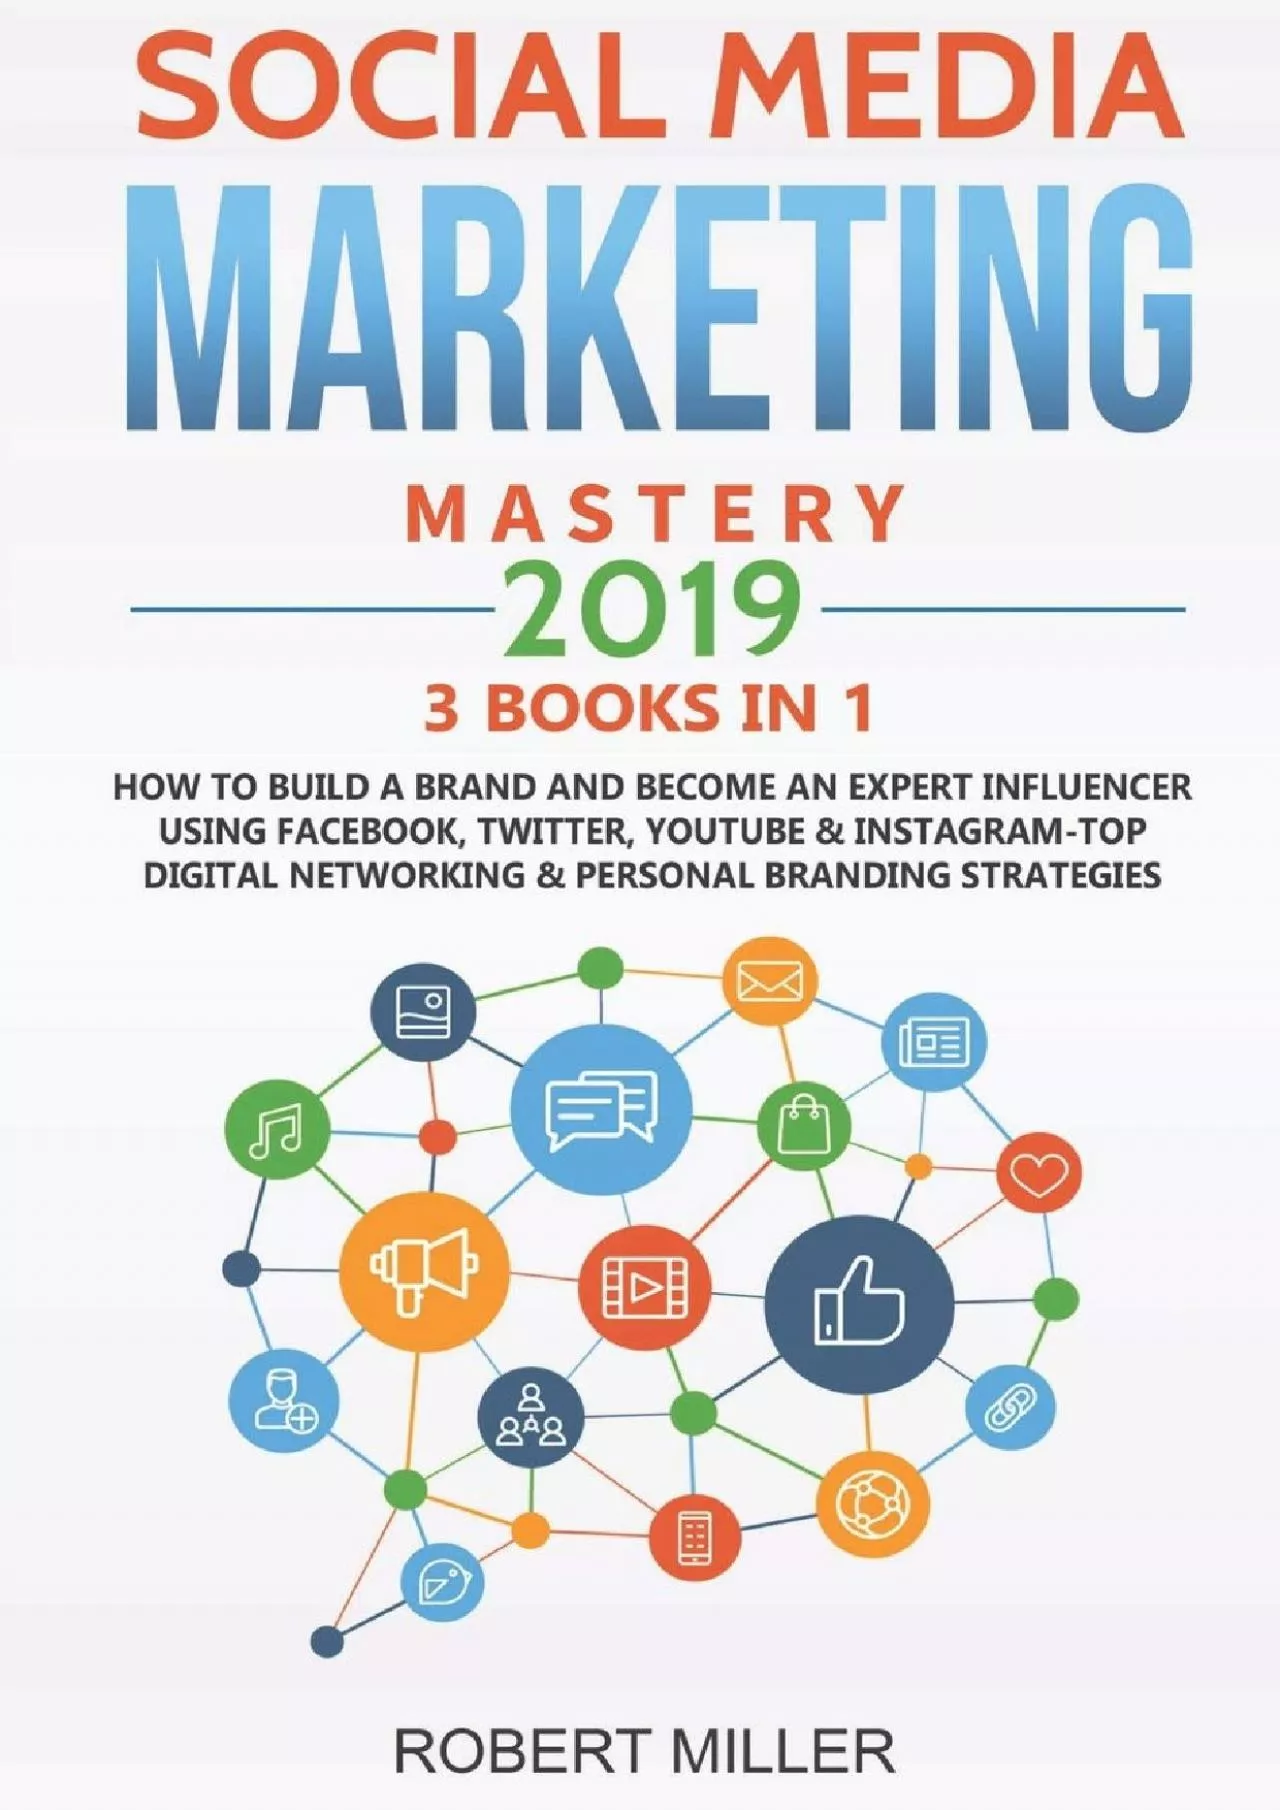 Social Media Marketing Mastery 2019:3 BOOKS IN 1-How to Build a Brand and Become an Expert